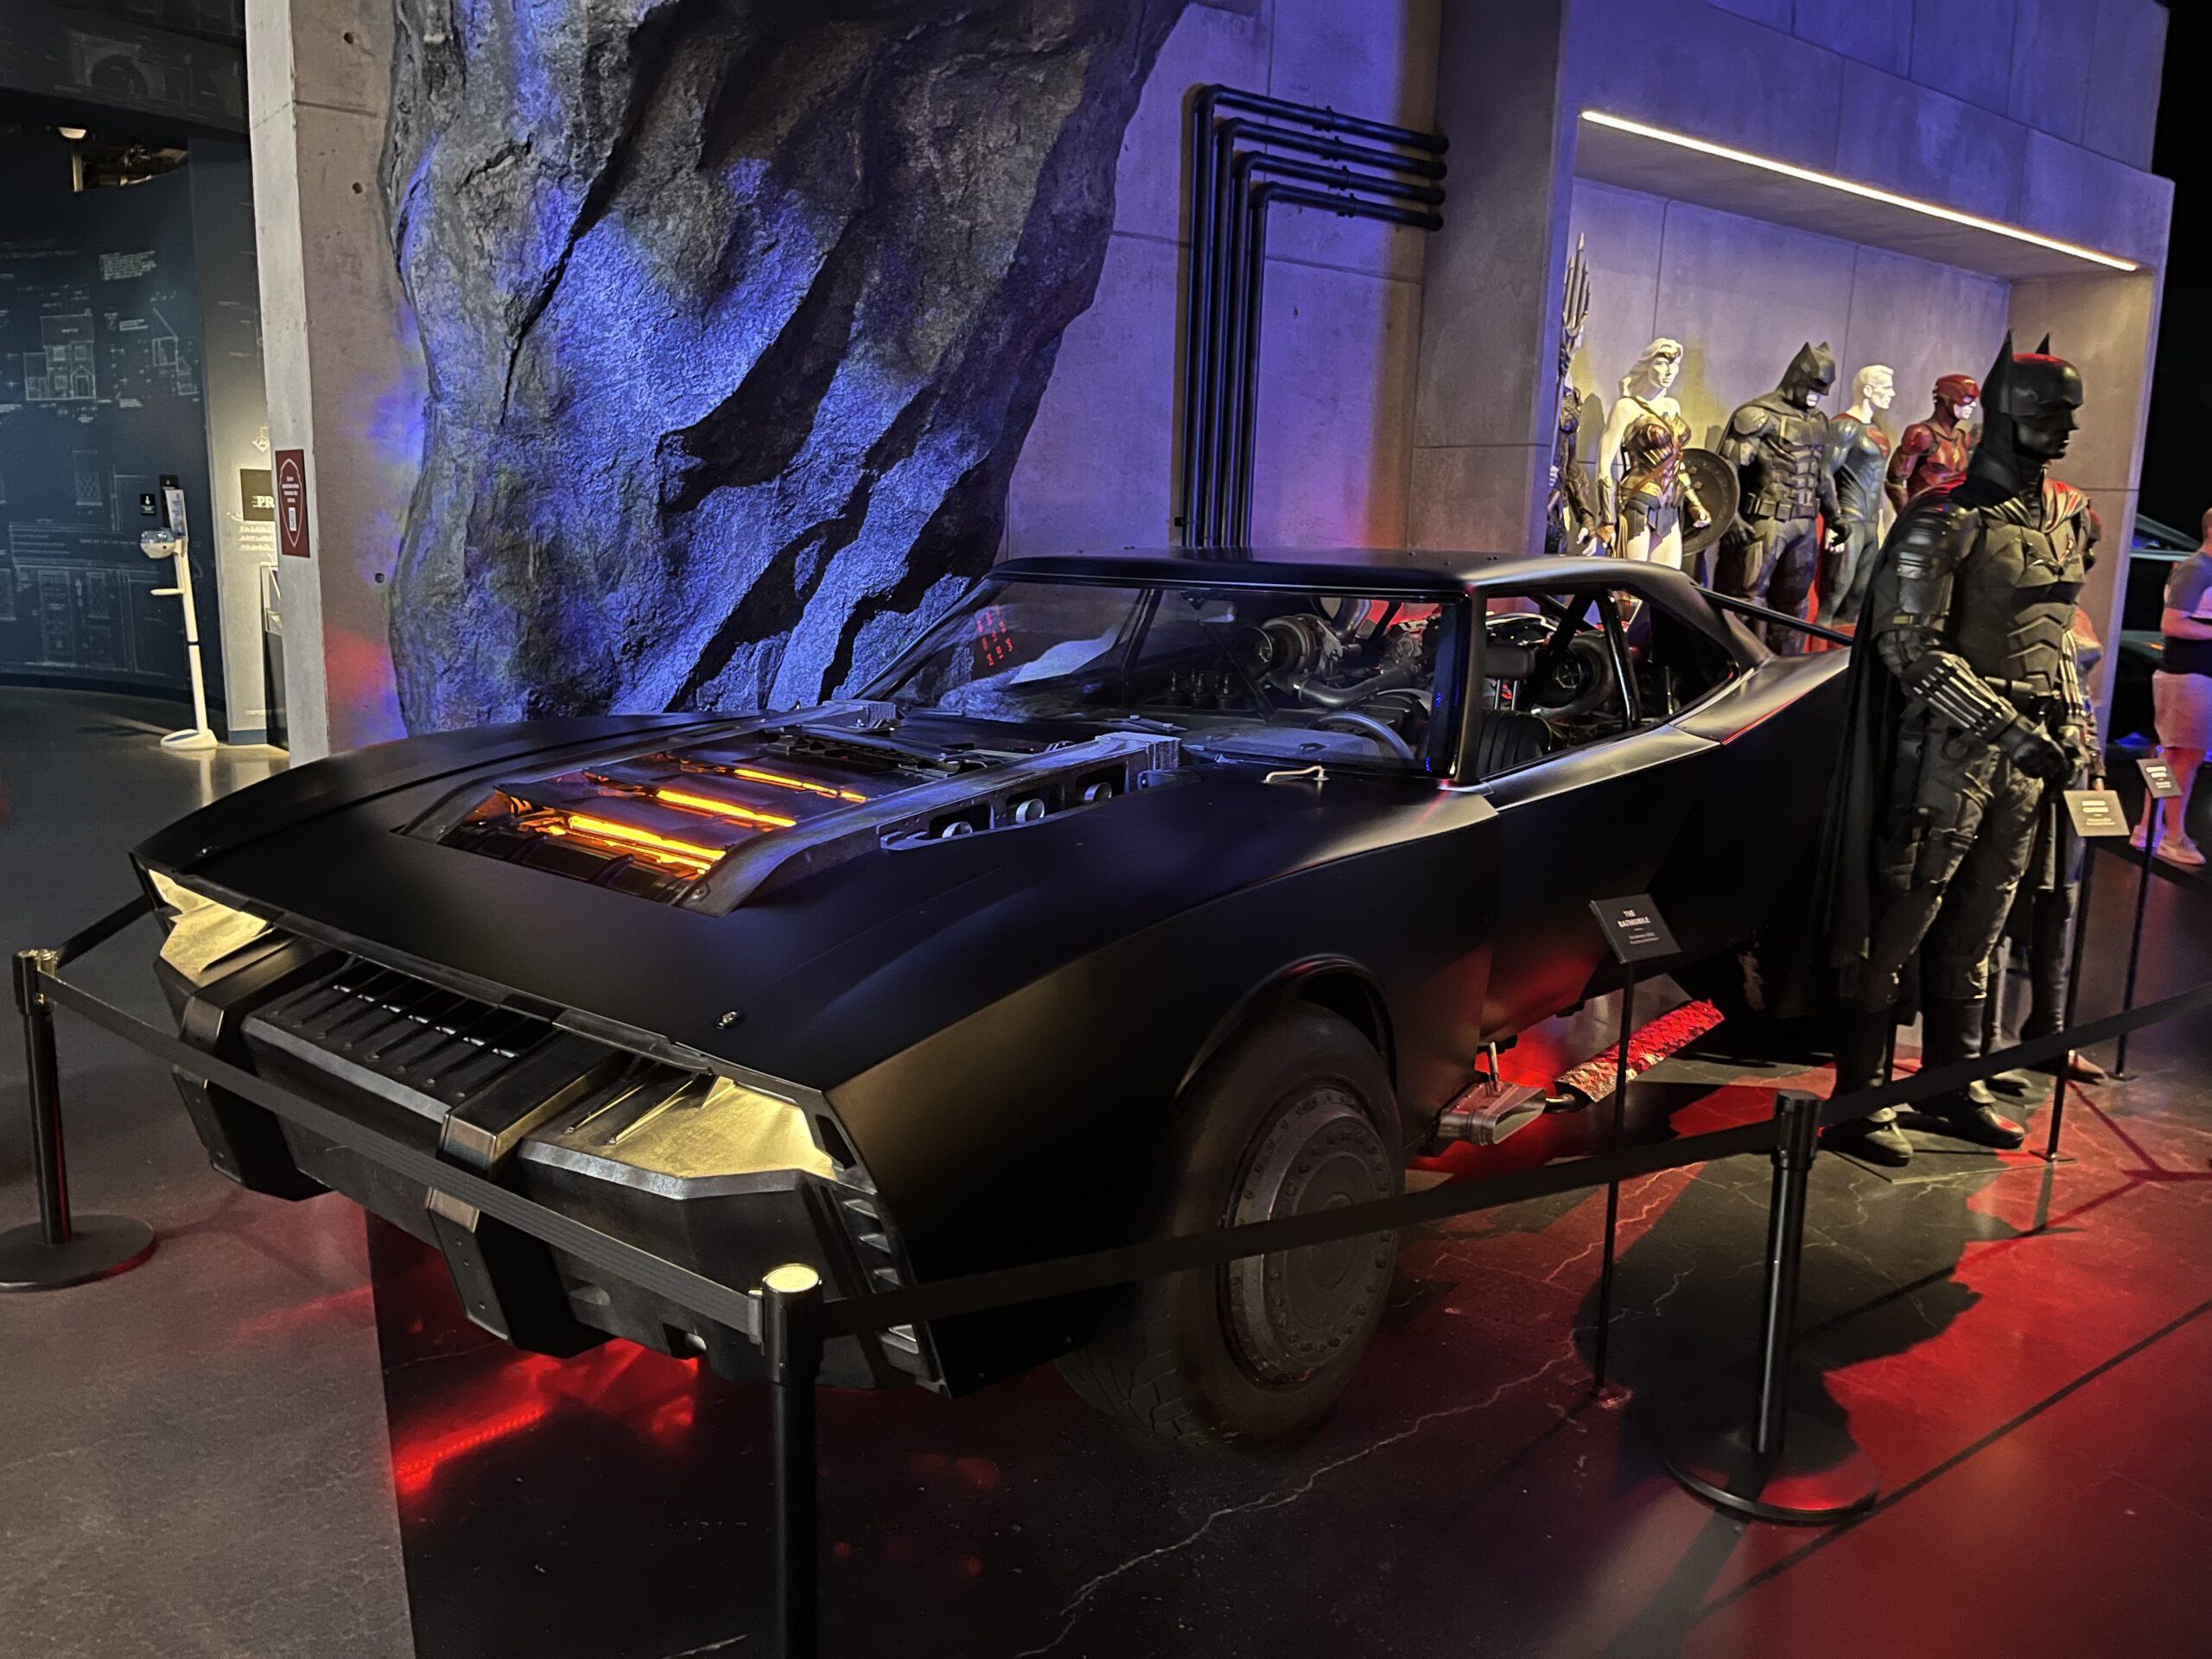 A Look Behind The Movie Magic | The Warner Bros. Studio Tour Hollywood